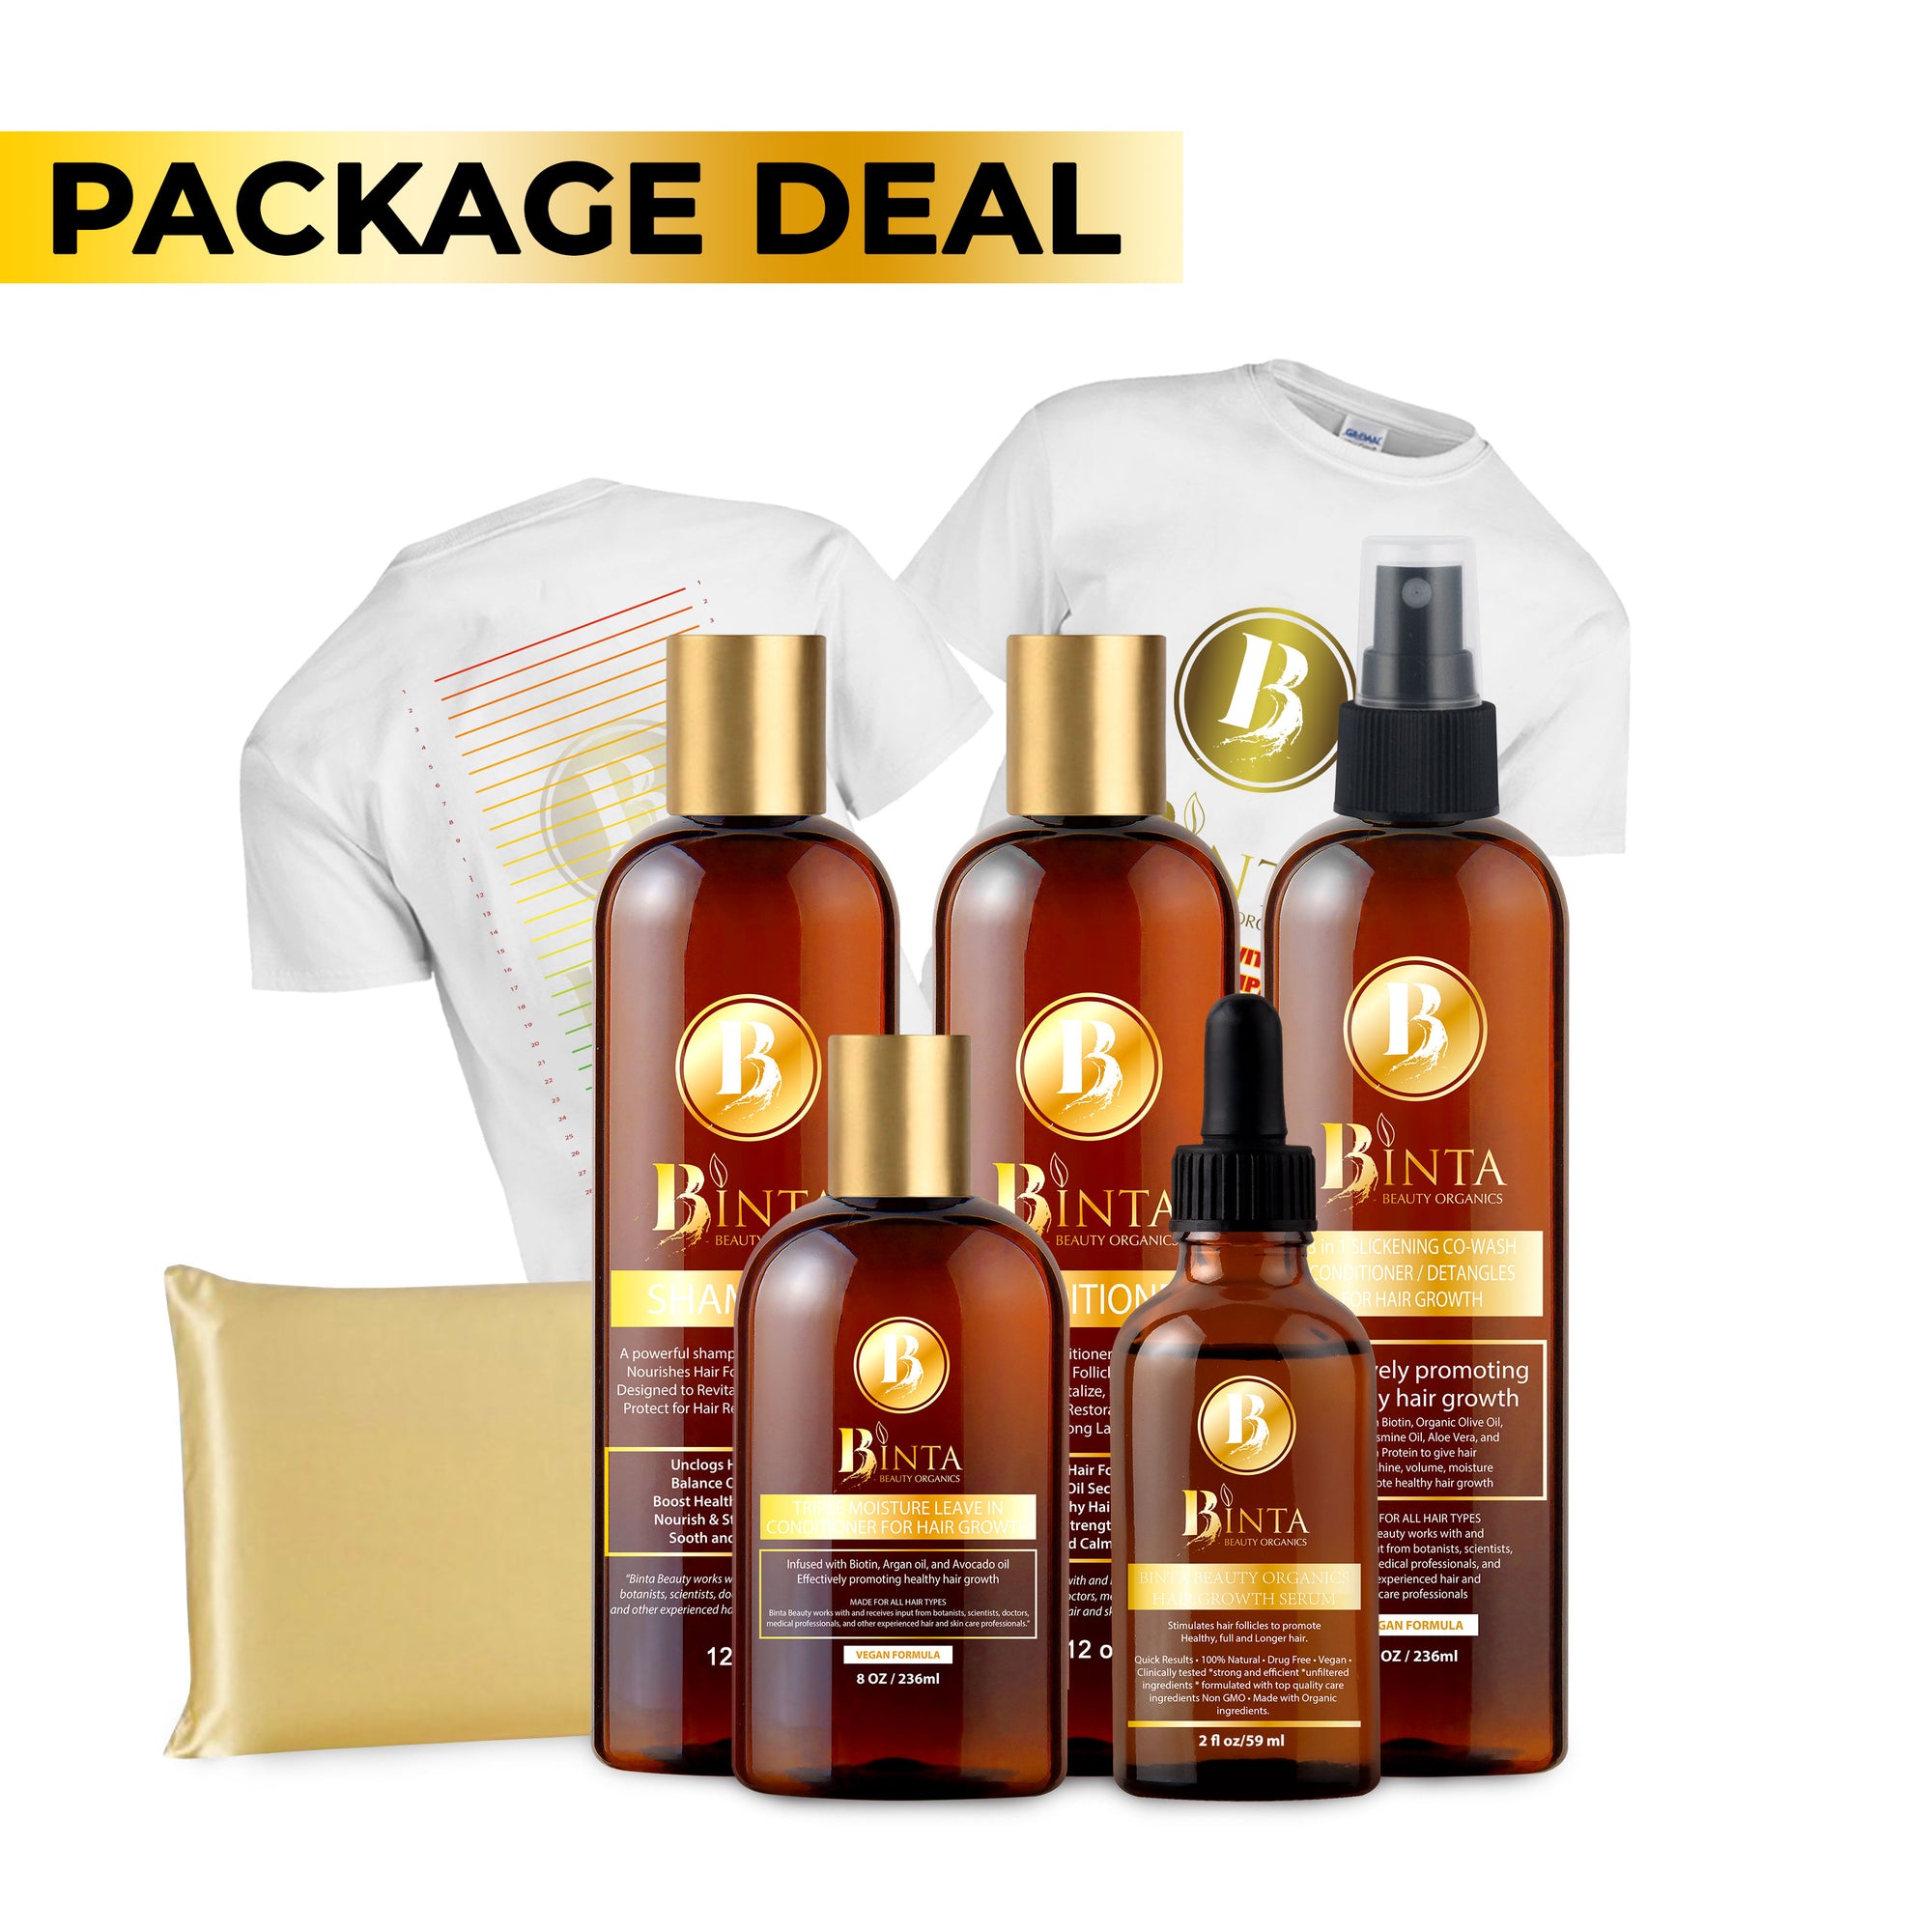 The Top Notch Hair Care: Package Deal